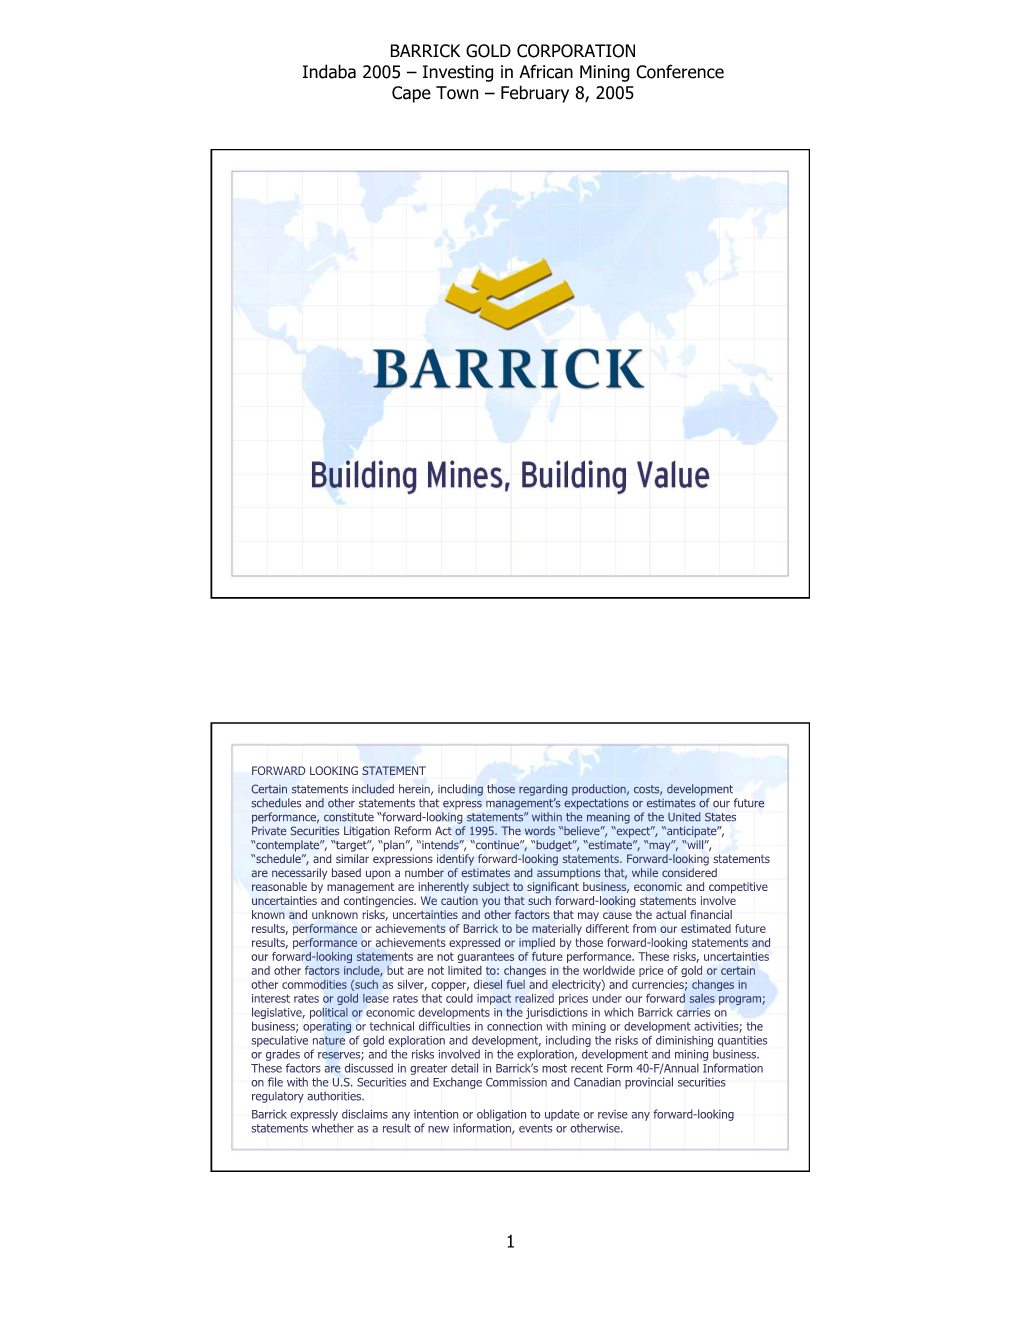 BARRICK GOLD CORPORATION Indaba 2005 – Investing in African Mining Conference Cape Town – February 8, 2005